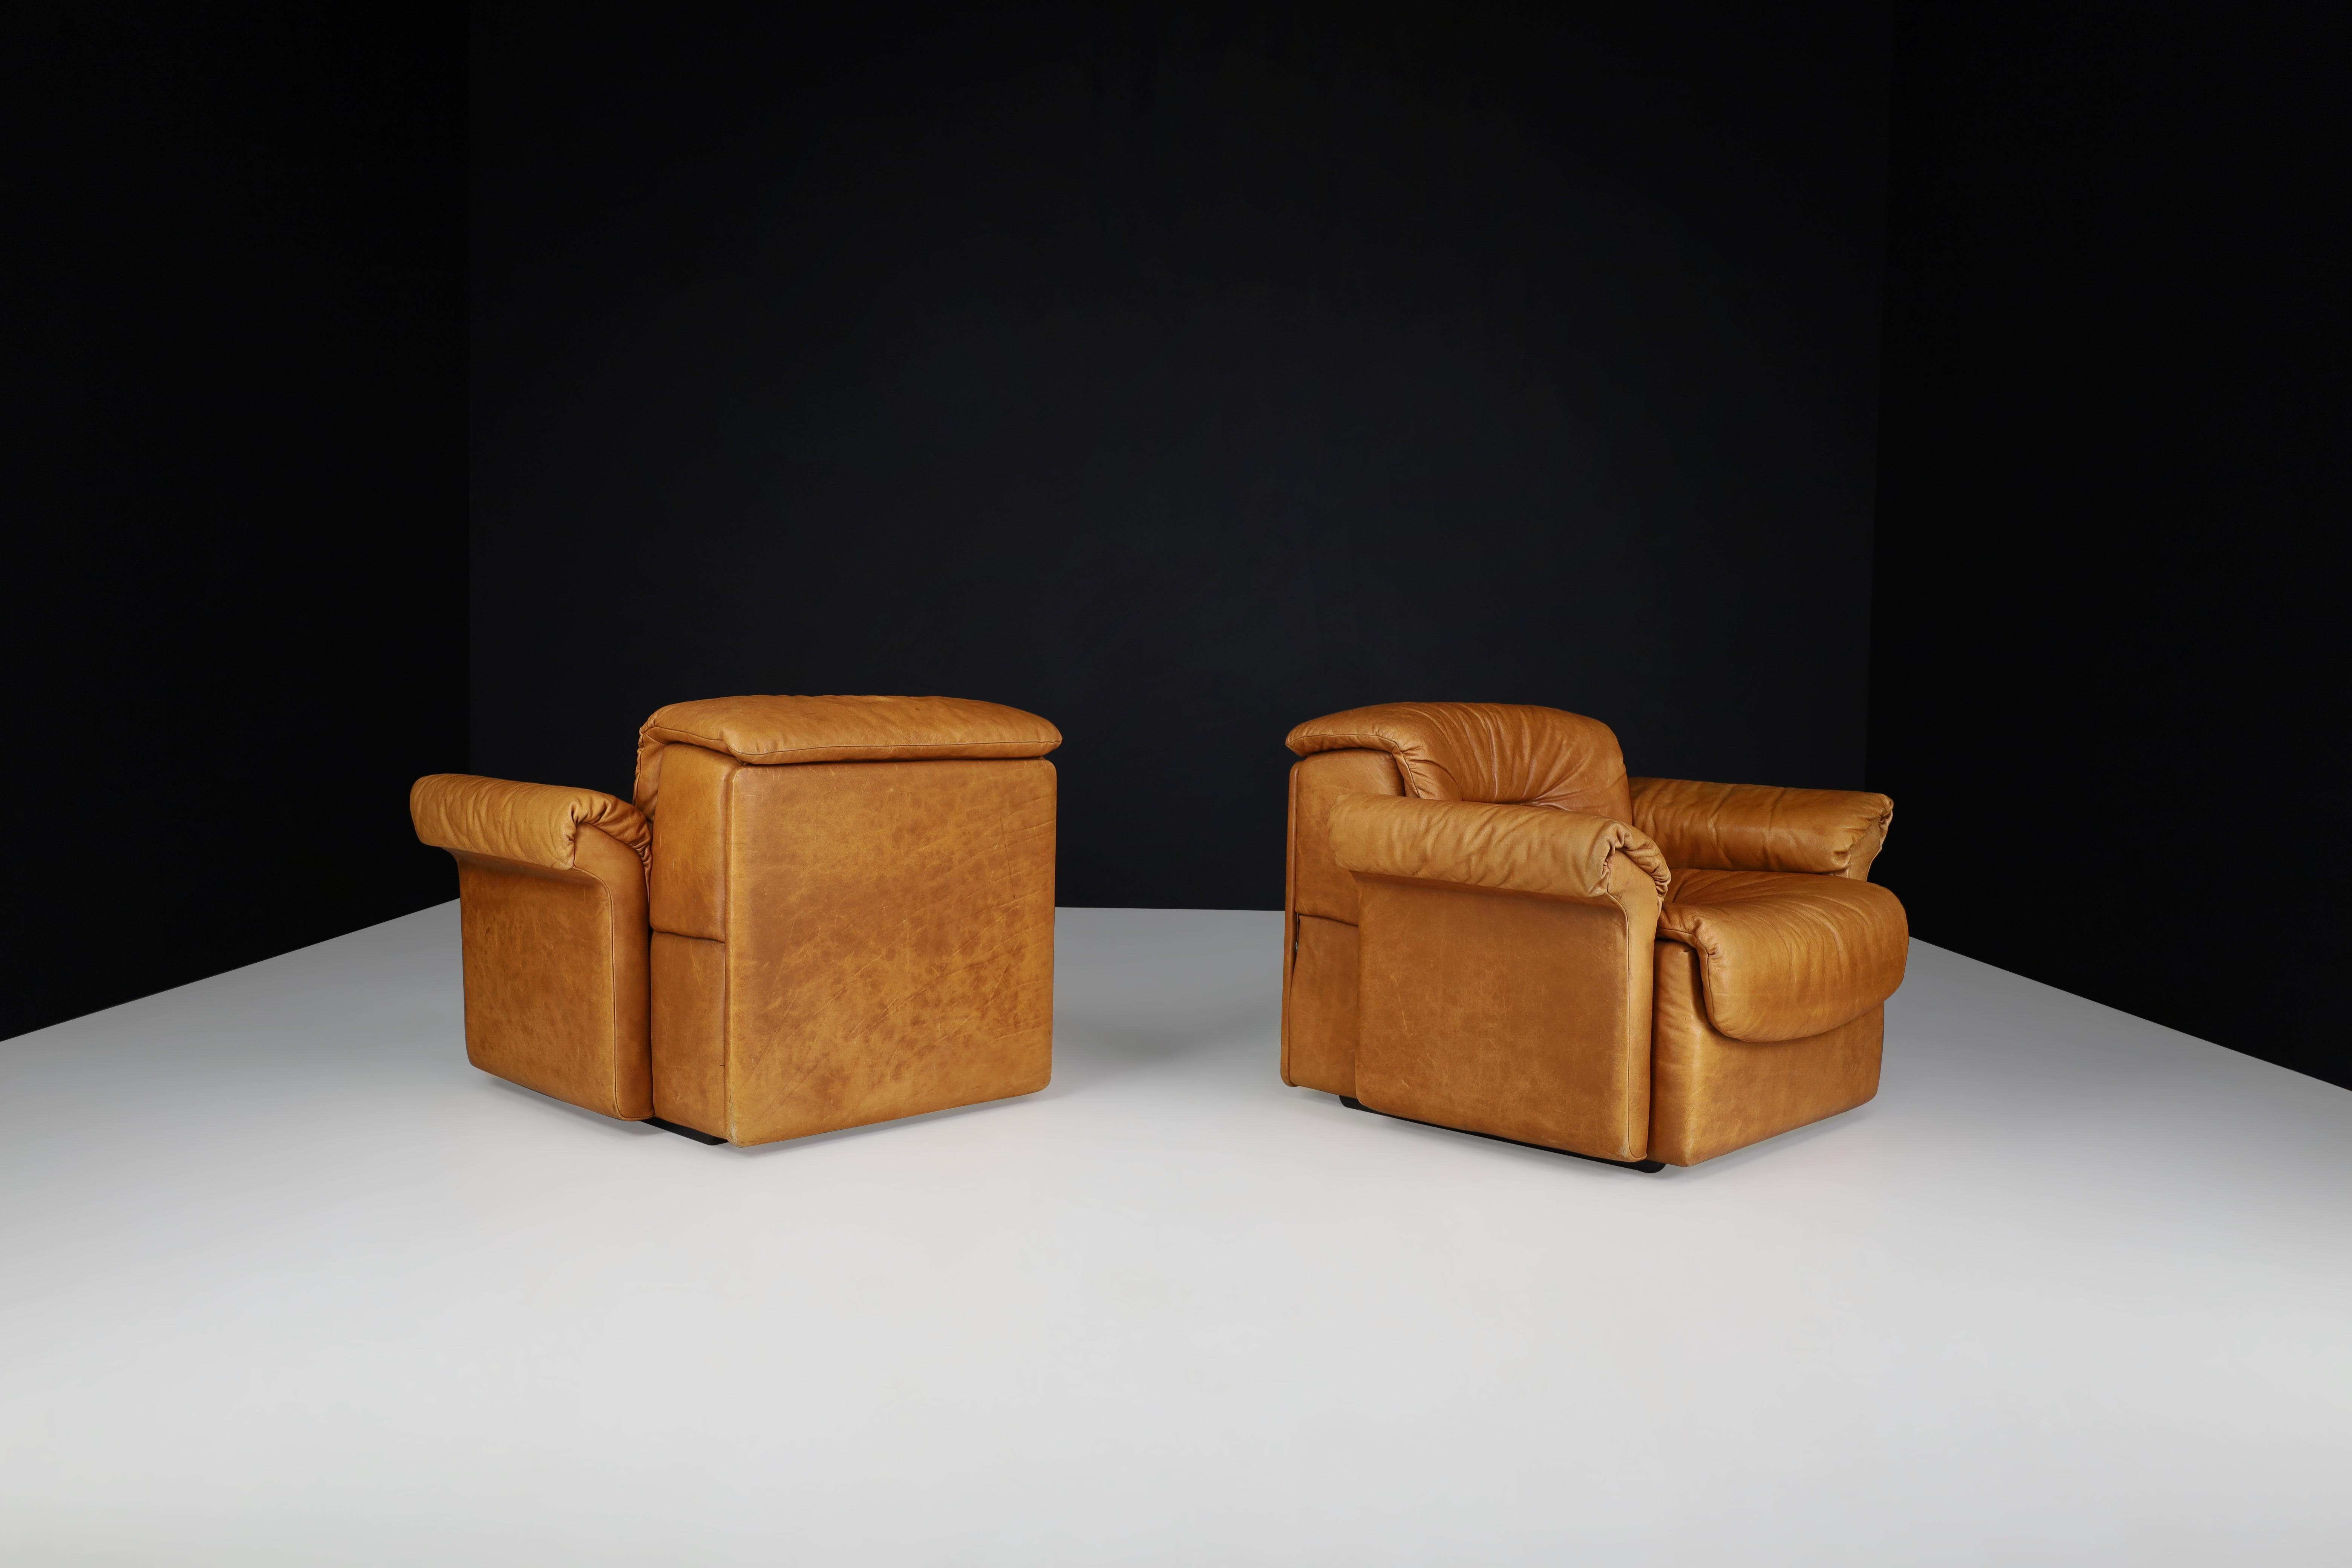 De Sede DS 14 Lounge Chairs in Patinated Cognac Leather, Switzerland, 1970s For Sale 1